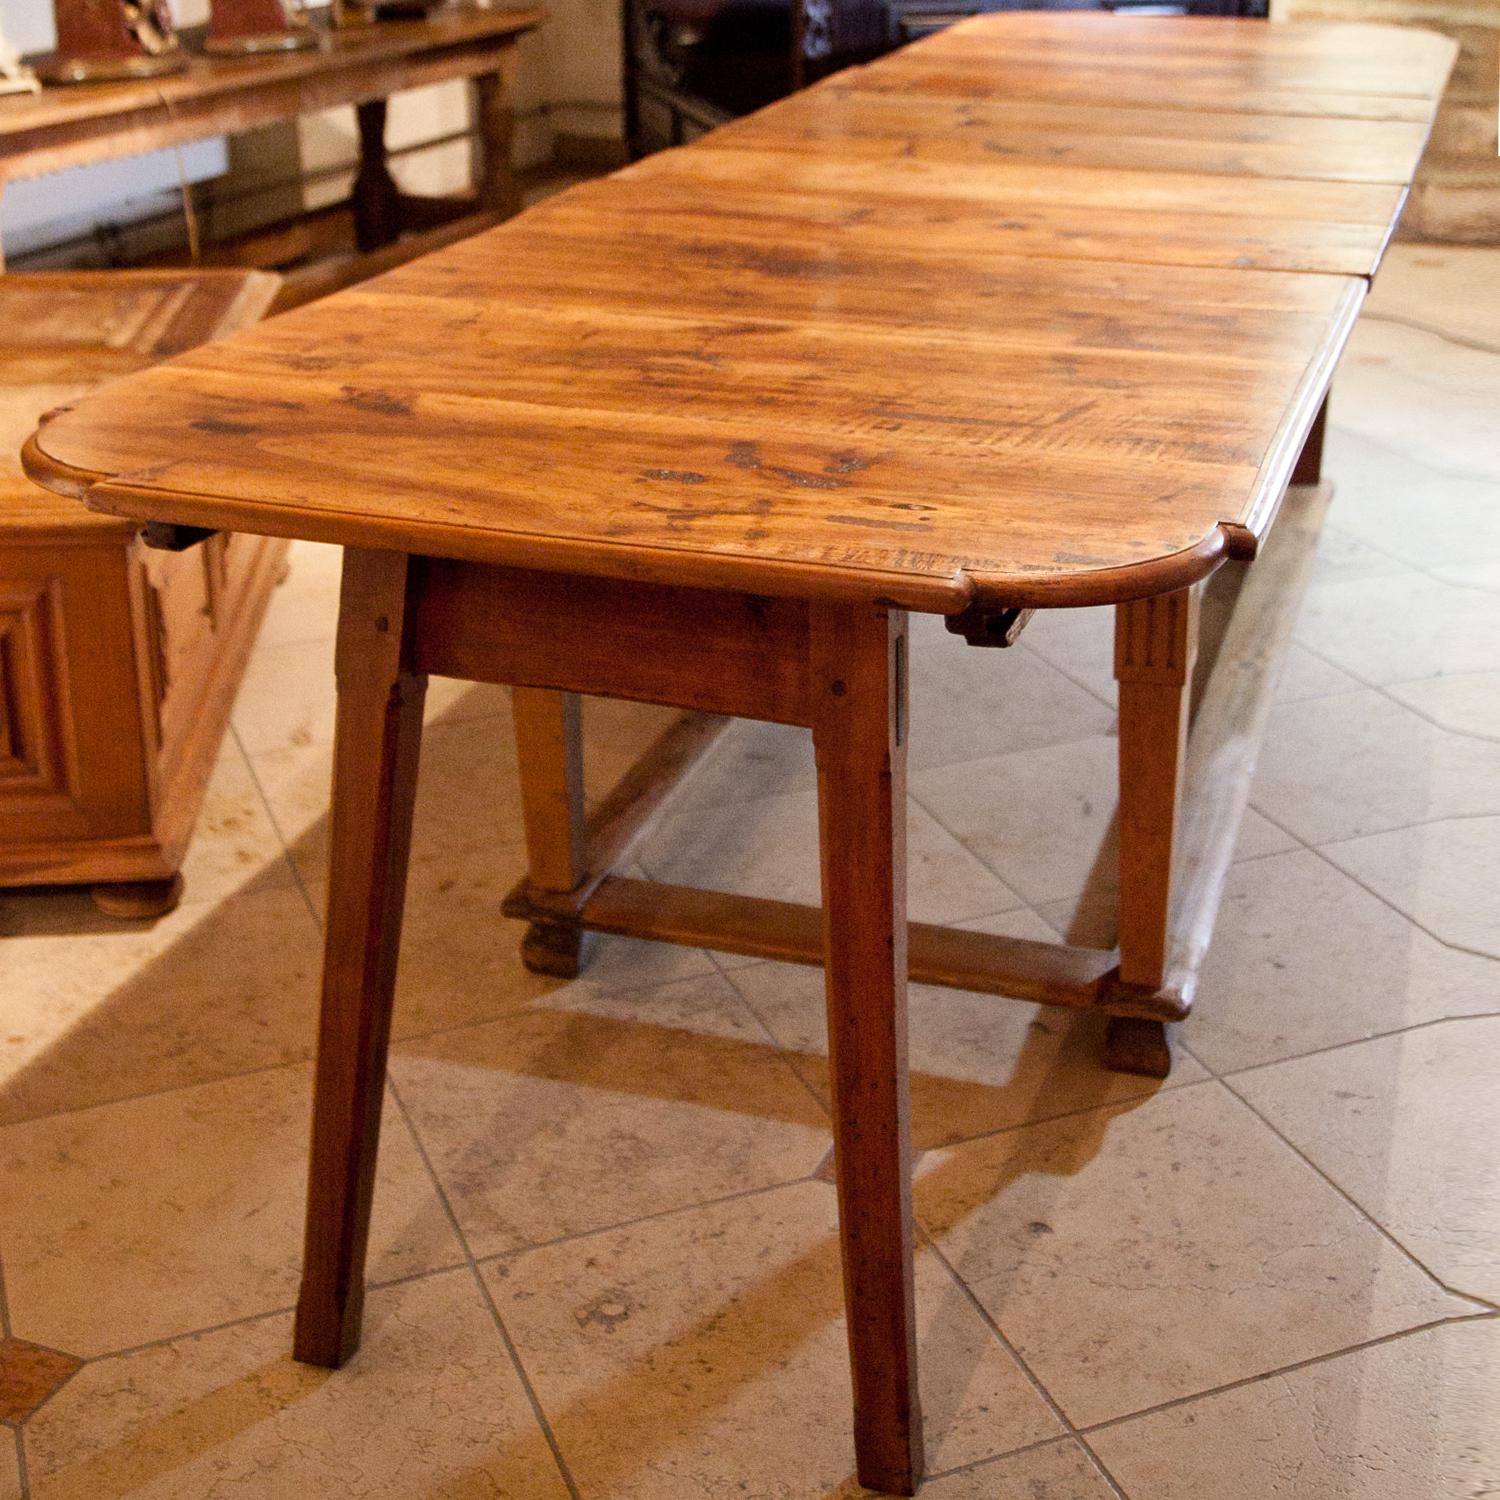 Very long dining table in its original condition, the legs are slightly tapered and are connected through strutting. Foldable legs support the extendable tabletop. Very nice natural patina.